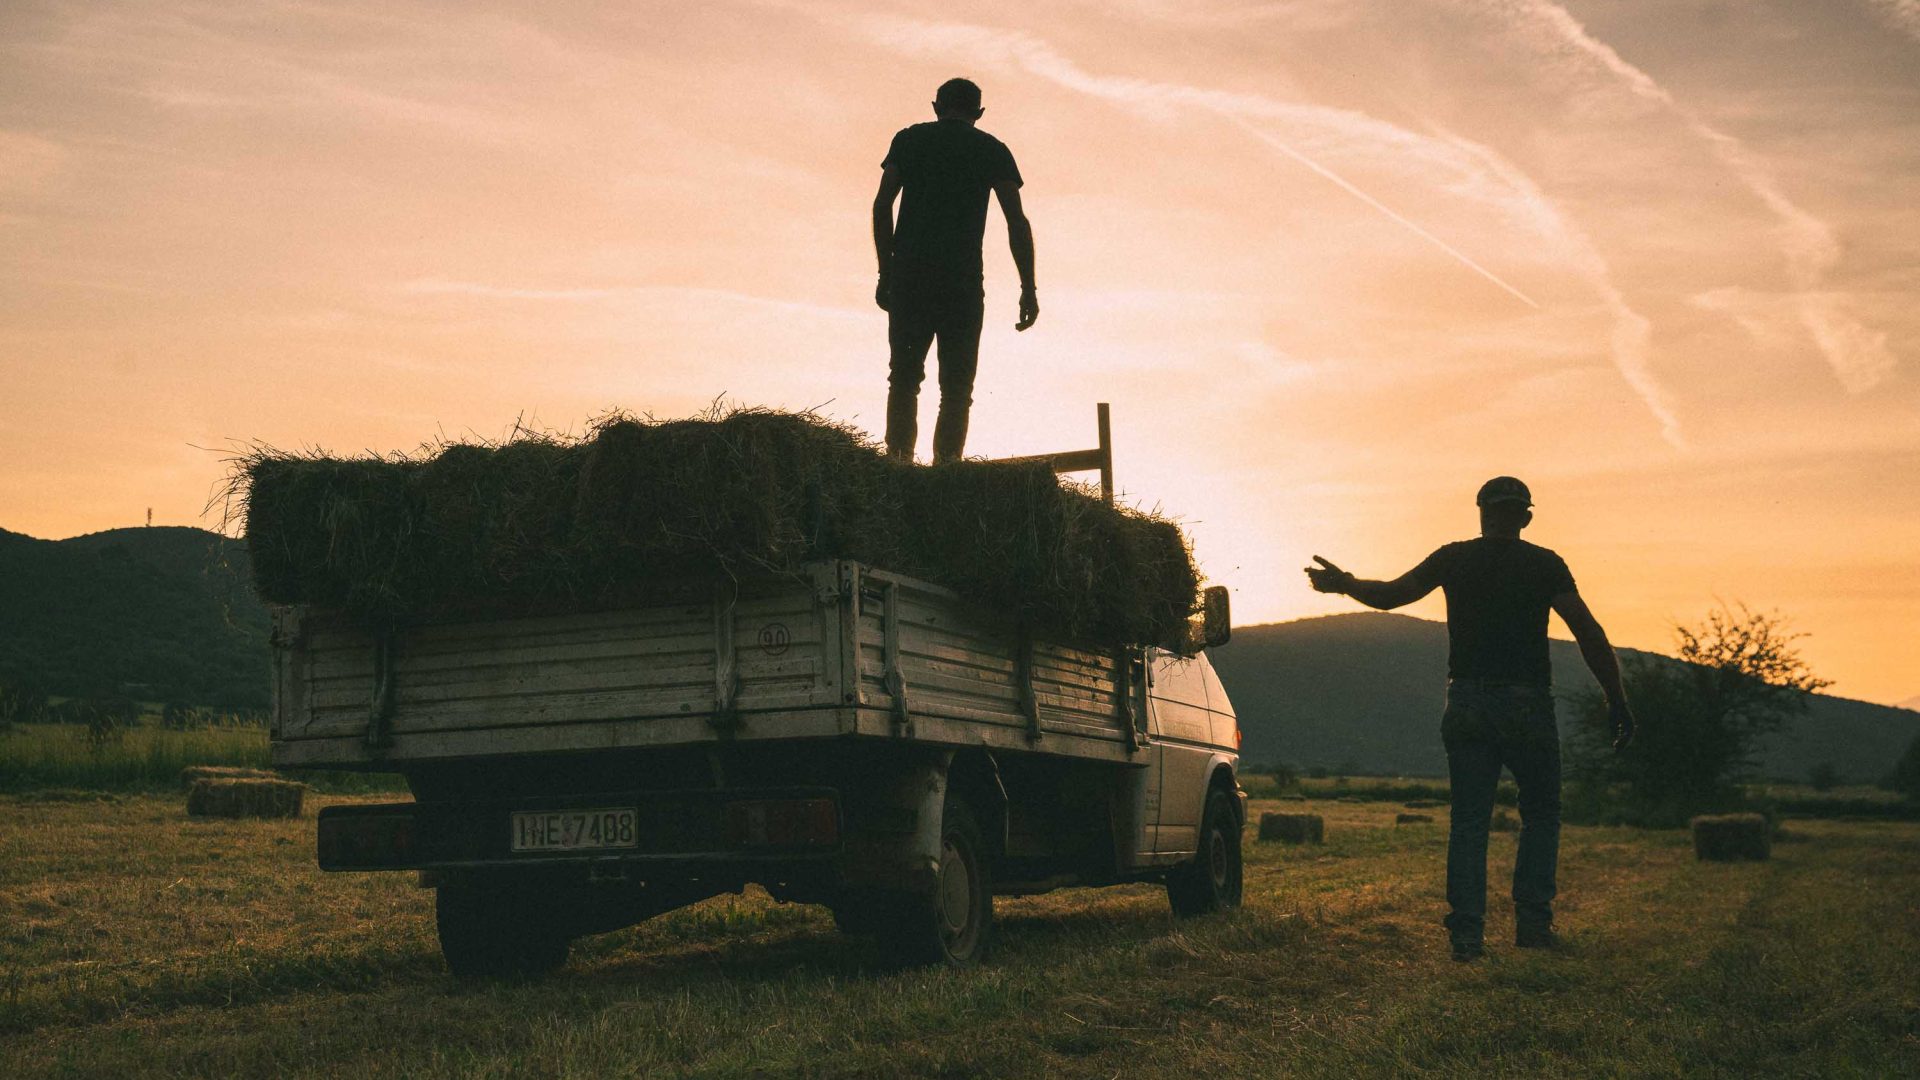 Silhouetted farm workers load hay onto a truck.